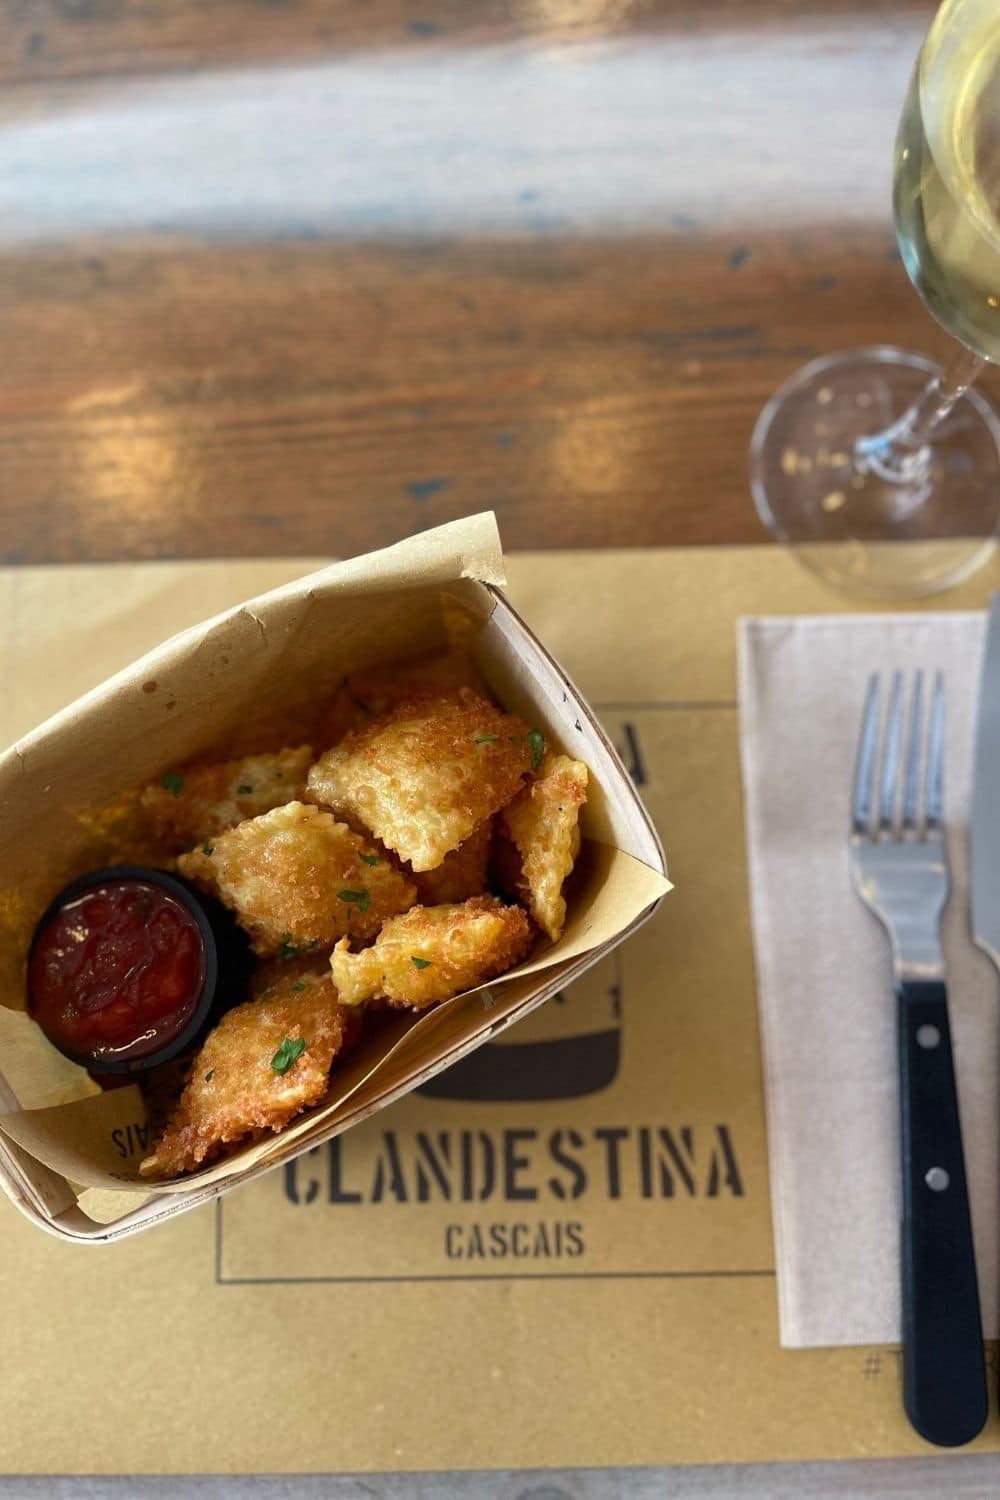 Close-up of crispy fried ravioli in a takeout box served with tomato sauce, next to a half-empty glass of white wine, on a wooden table with a branded napkin saying 'Clandestina Cascais